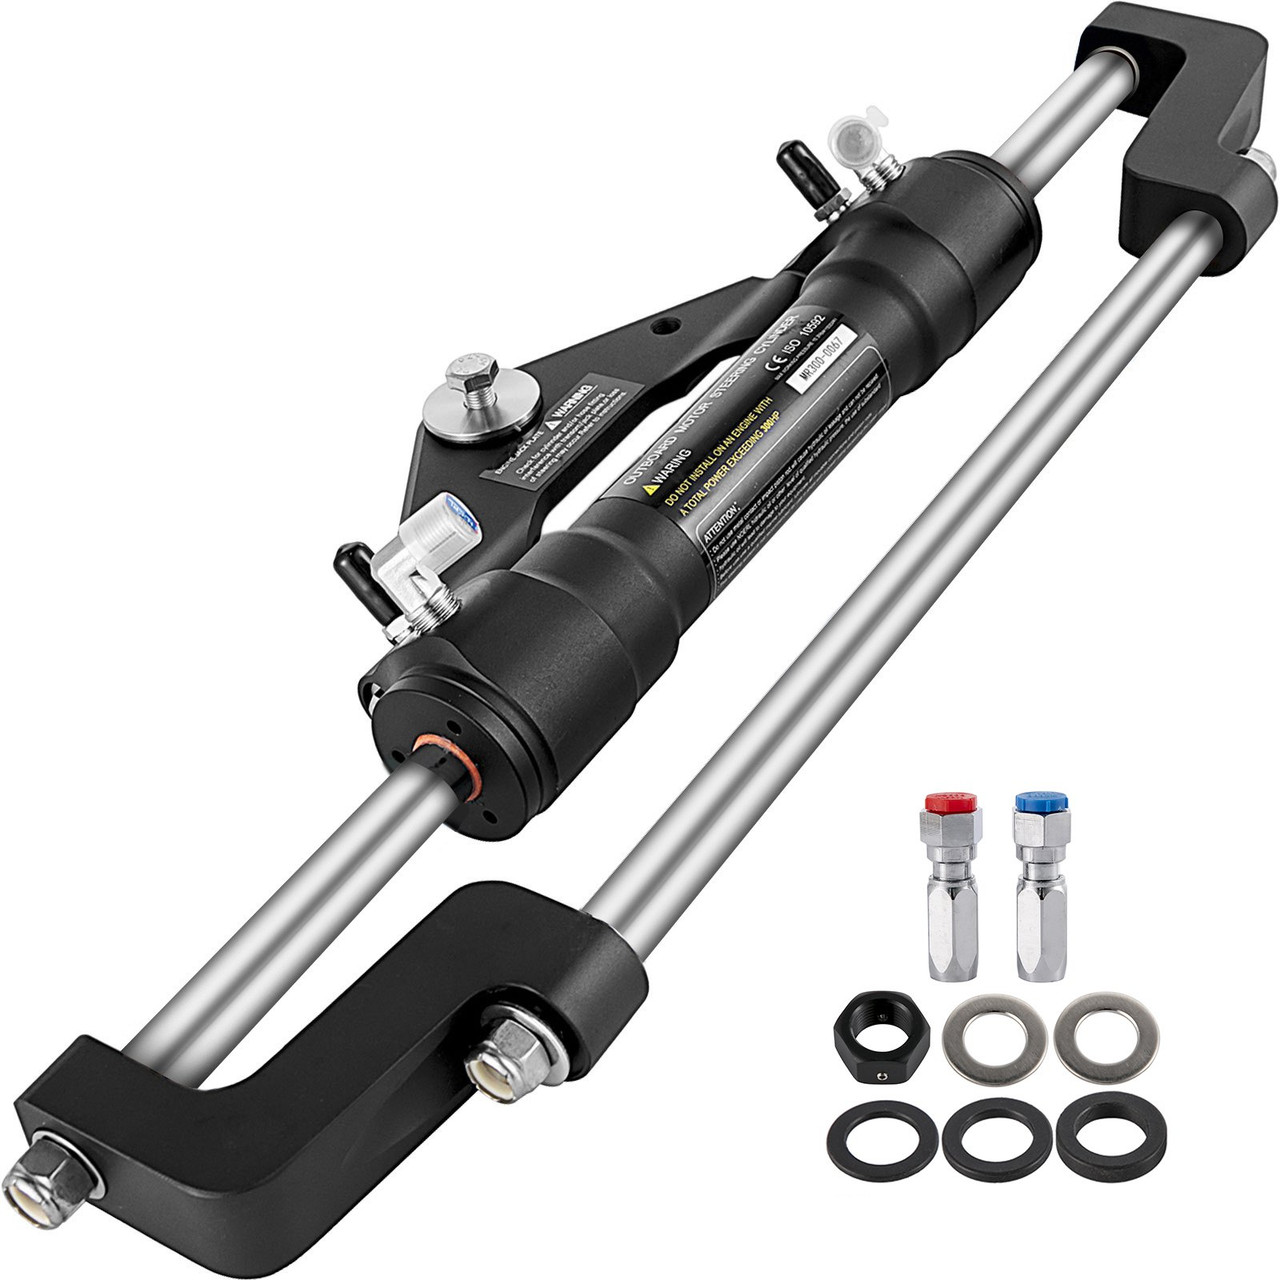 Hydraulic Steering Cylinder 300HP, Hydraulic Steering Front Mount Hydraulic Outboard Marine Steering Kit Without Hydraulic Hose and Helm for Outboards Boat Steering System